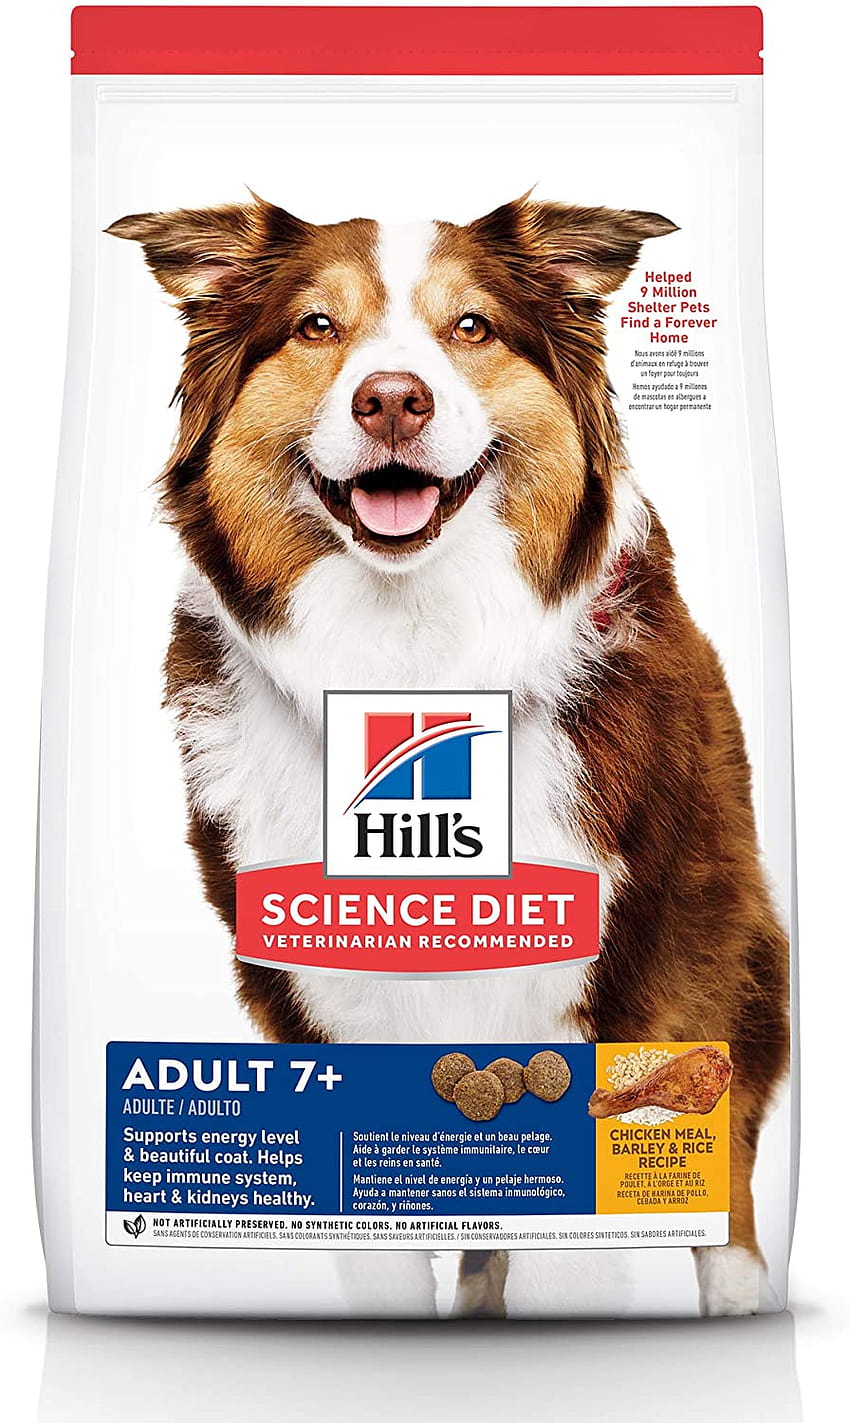 Hill's Science Diet Dry Dog Food, Adult for Senior Dogs, Chicken Meal, Barley & Brown Rice Recipe, 33 lb. Bag : Pet Supplies HD phone wallpaper